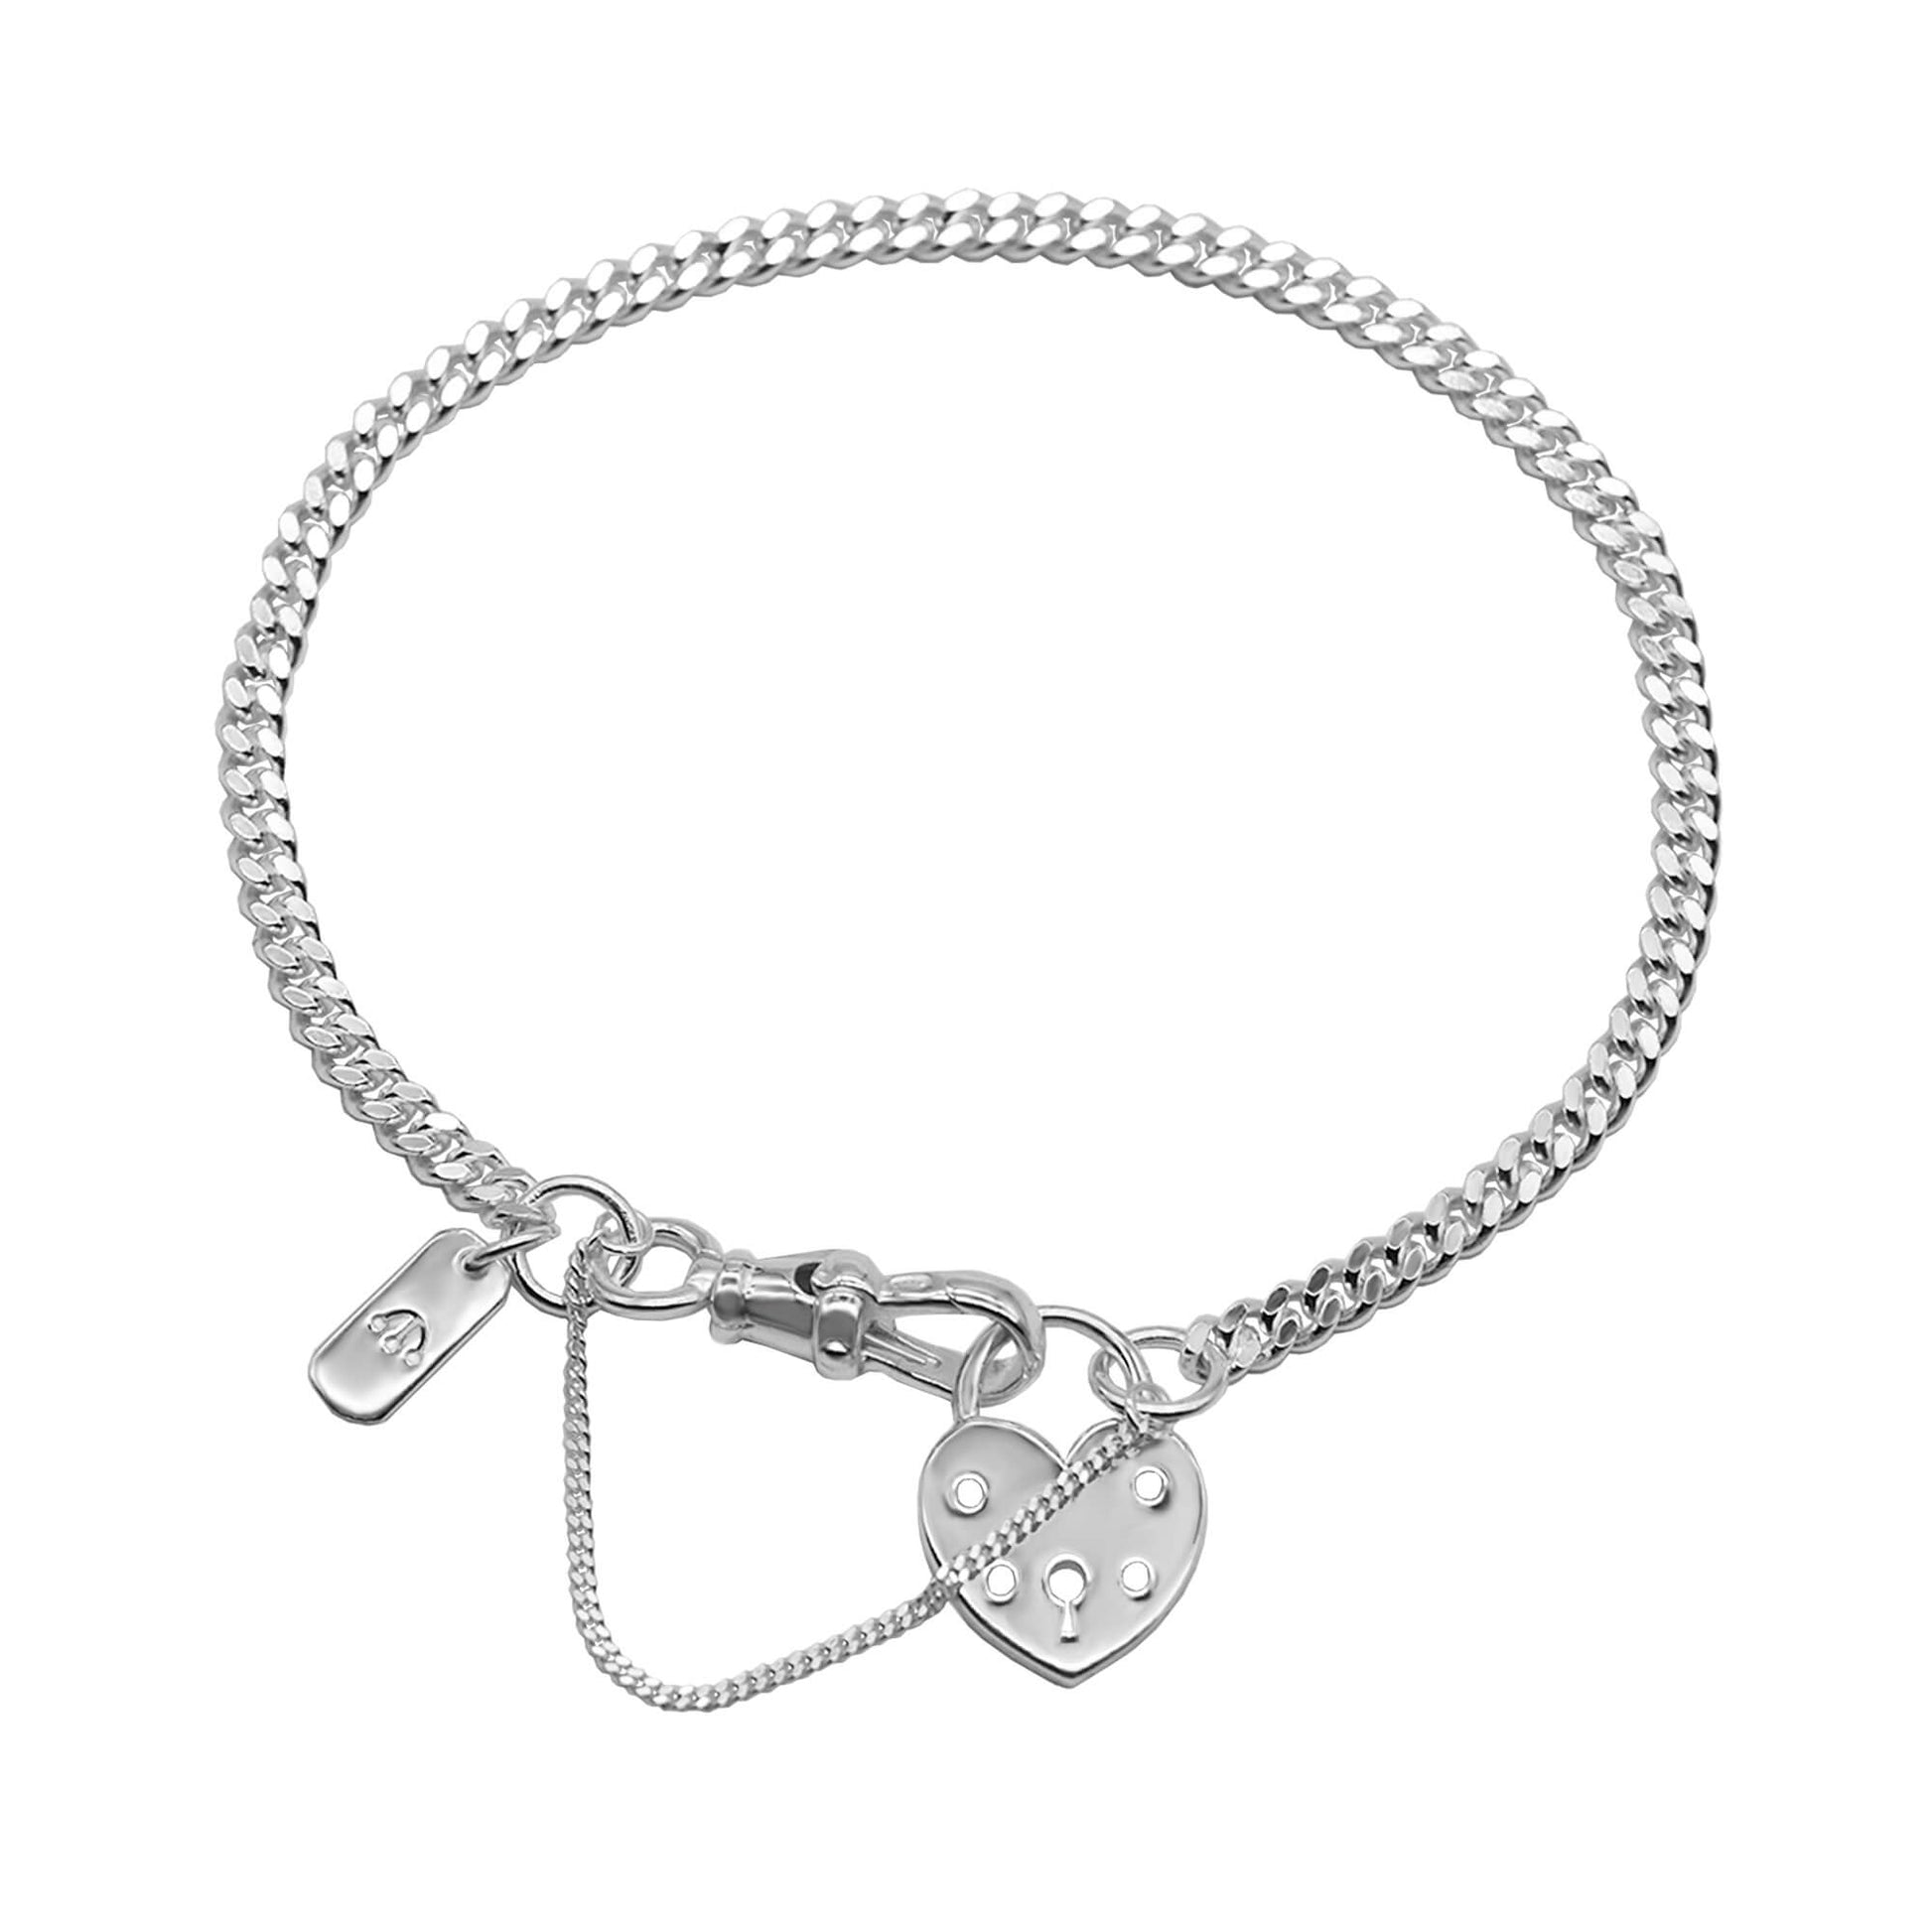 SILVER CURB CHAIN BRACELET WITH LOBSTER CLASP HEART LOCKET CHARM AND TAG WITH PAWNSHOP LOGO & SAFETY CHAIN.